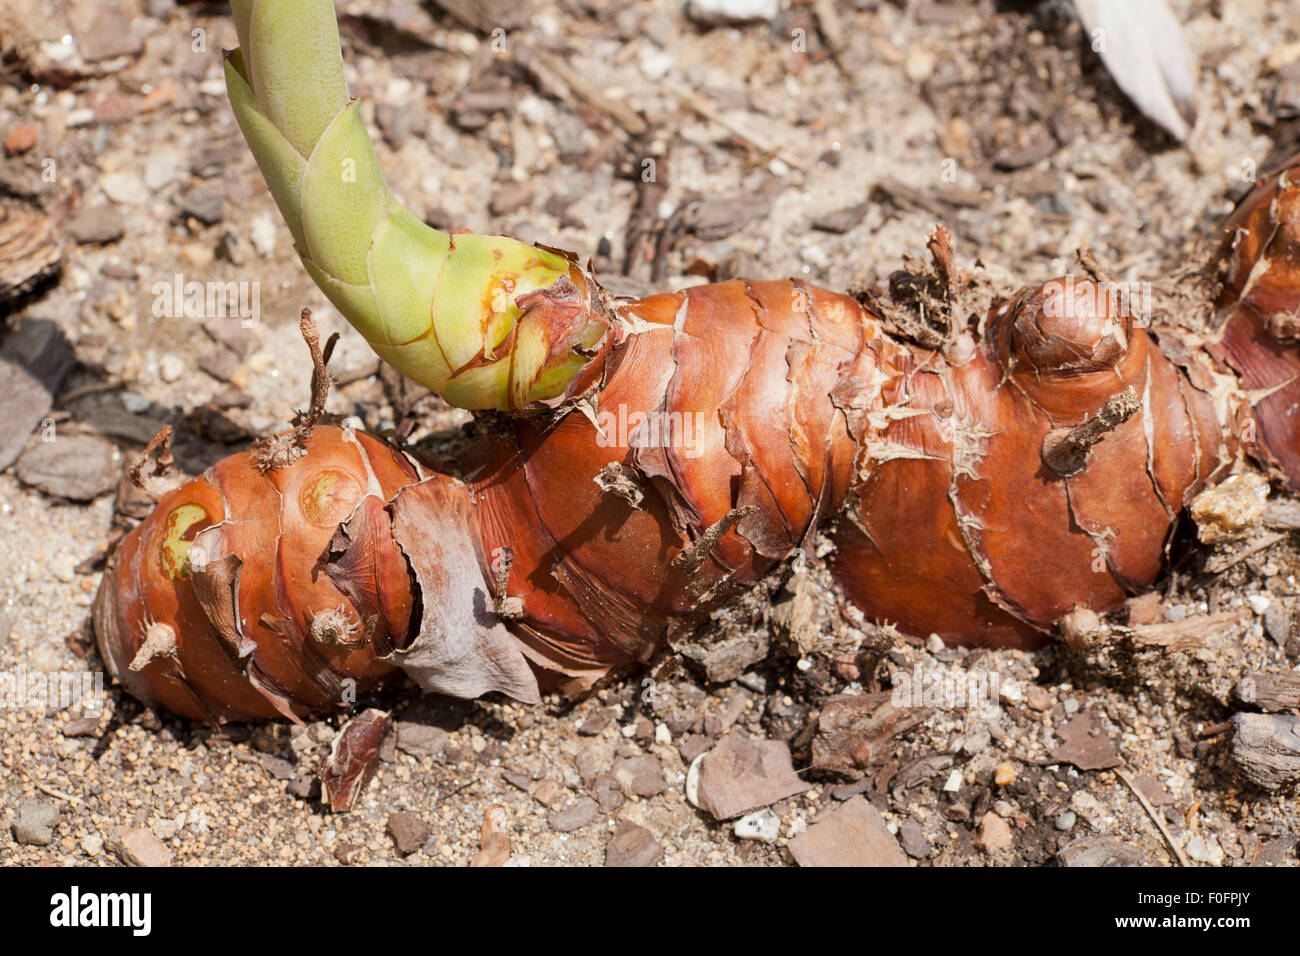 Kahili ginger, aka Kahila garland-lily, or ginger lily roots (Hedychium gardnerianum) Stock Photo